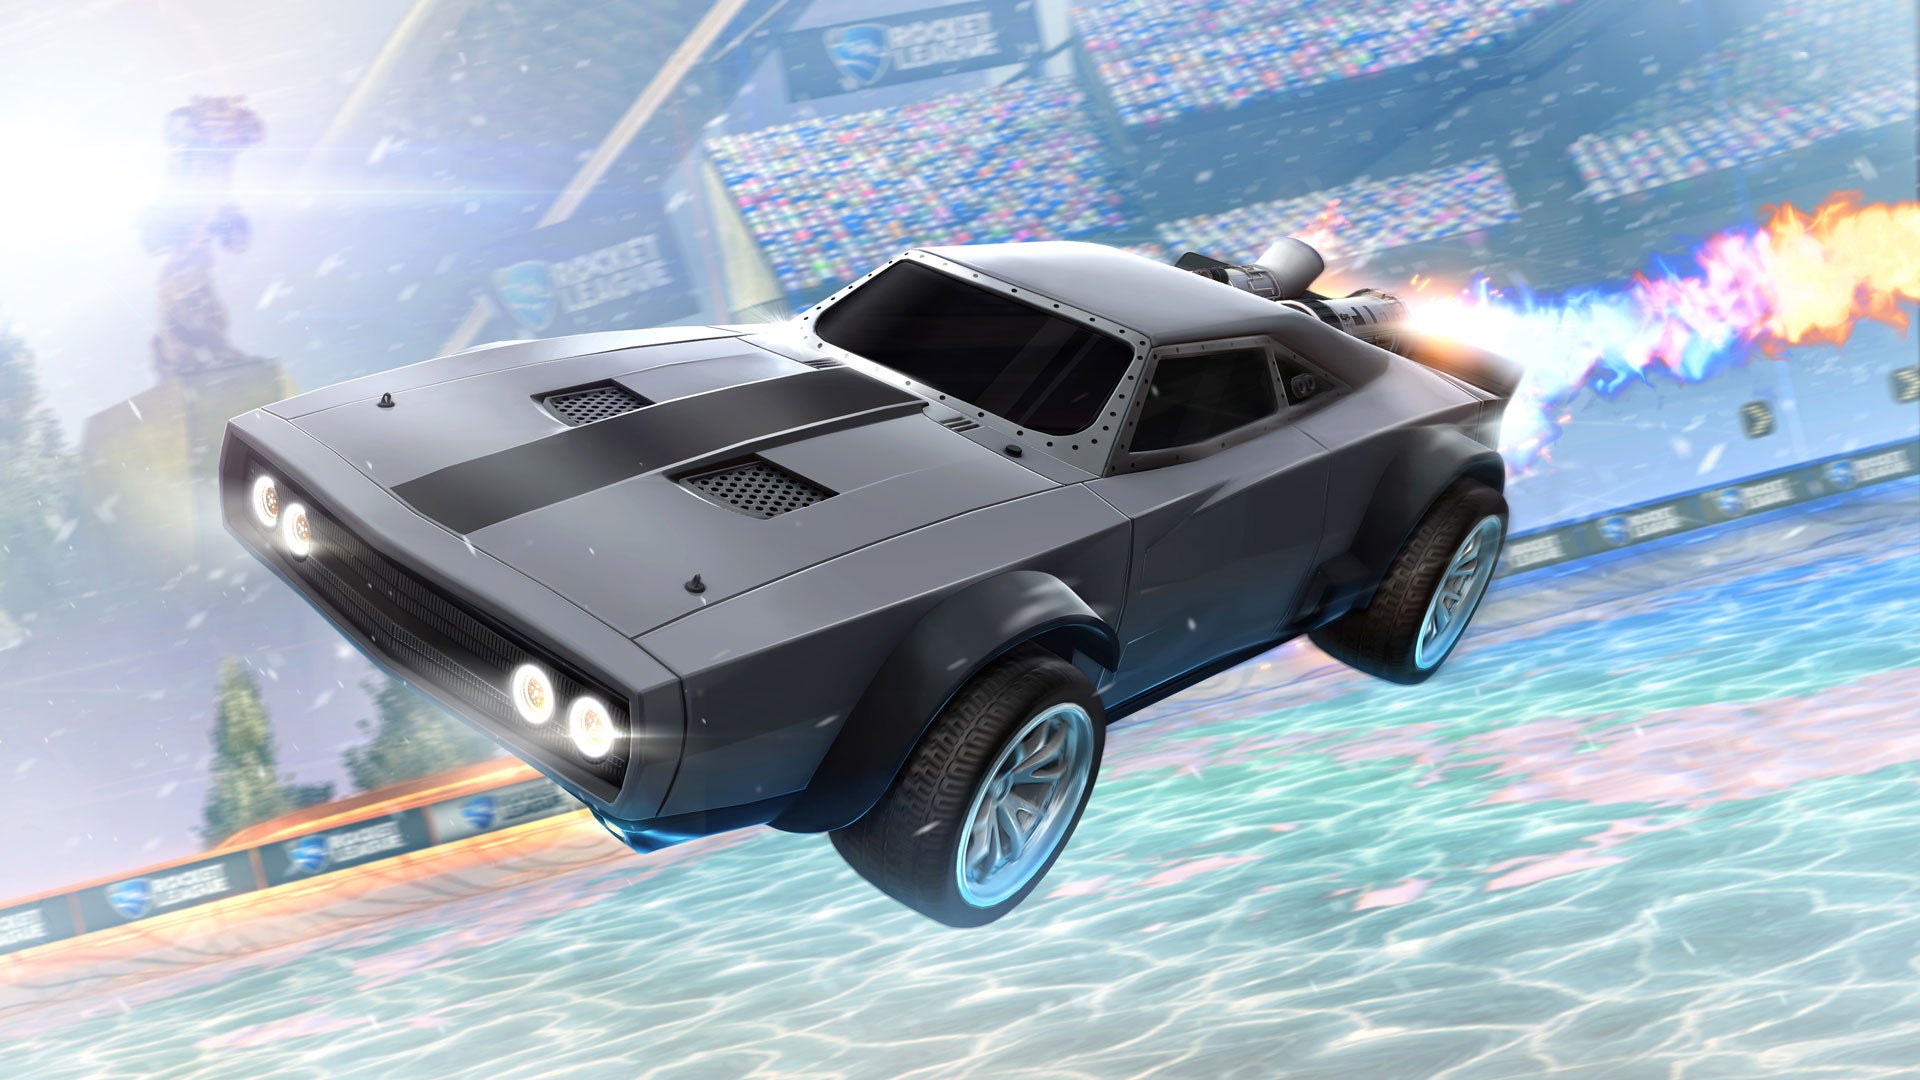 Rocket League Teams Up With The Fate Of The Furious Image